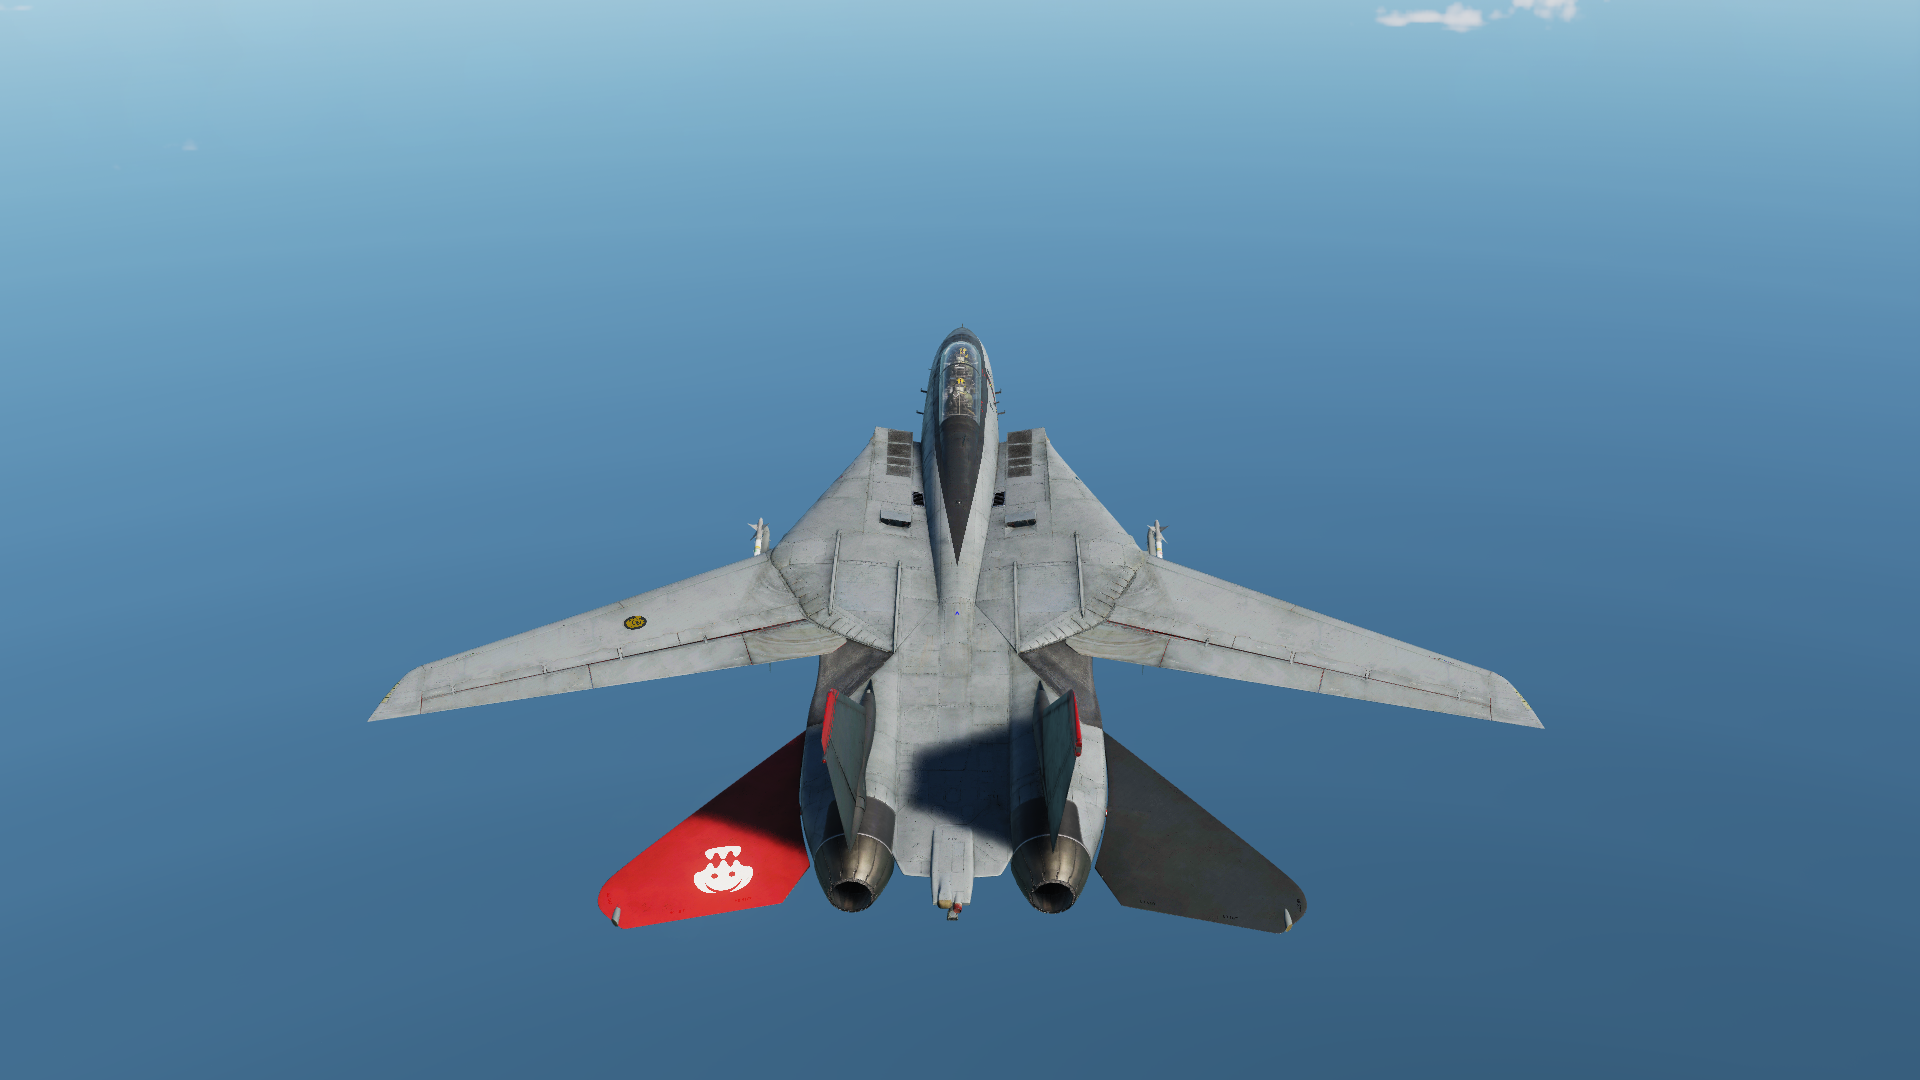 F-14 How to train your dragon themed livery.